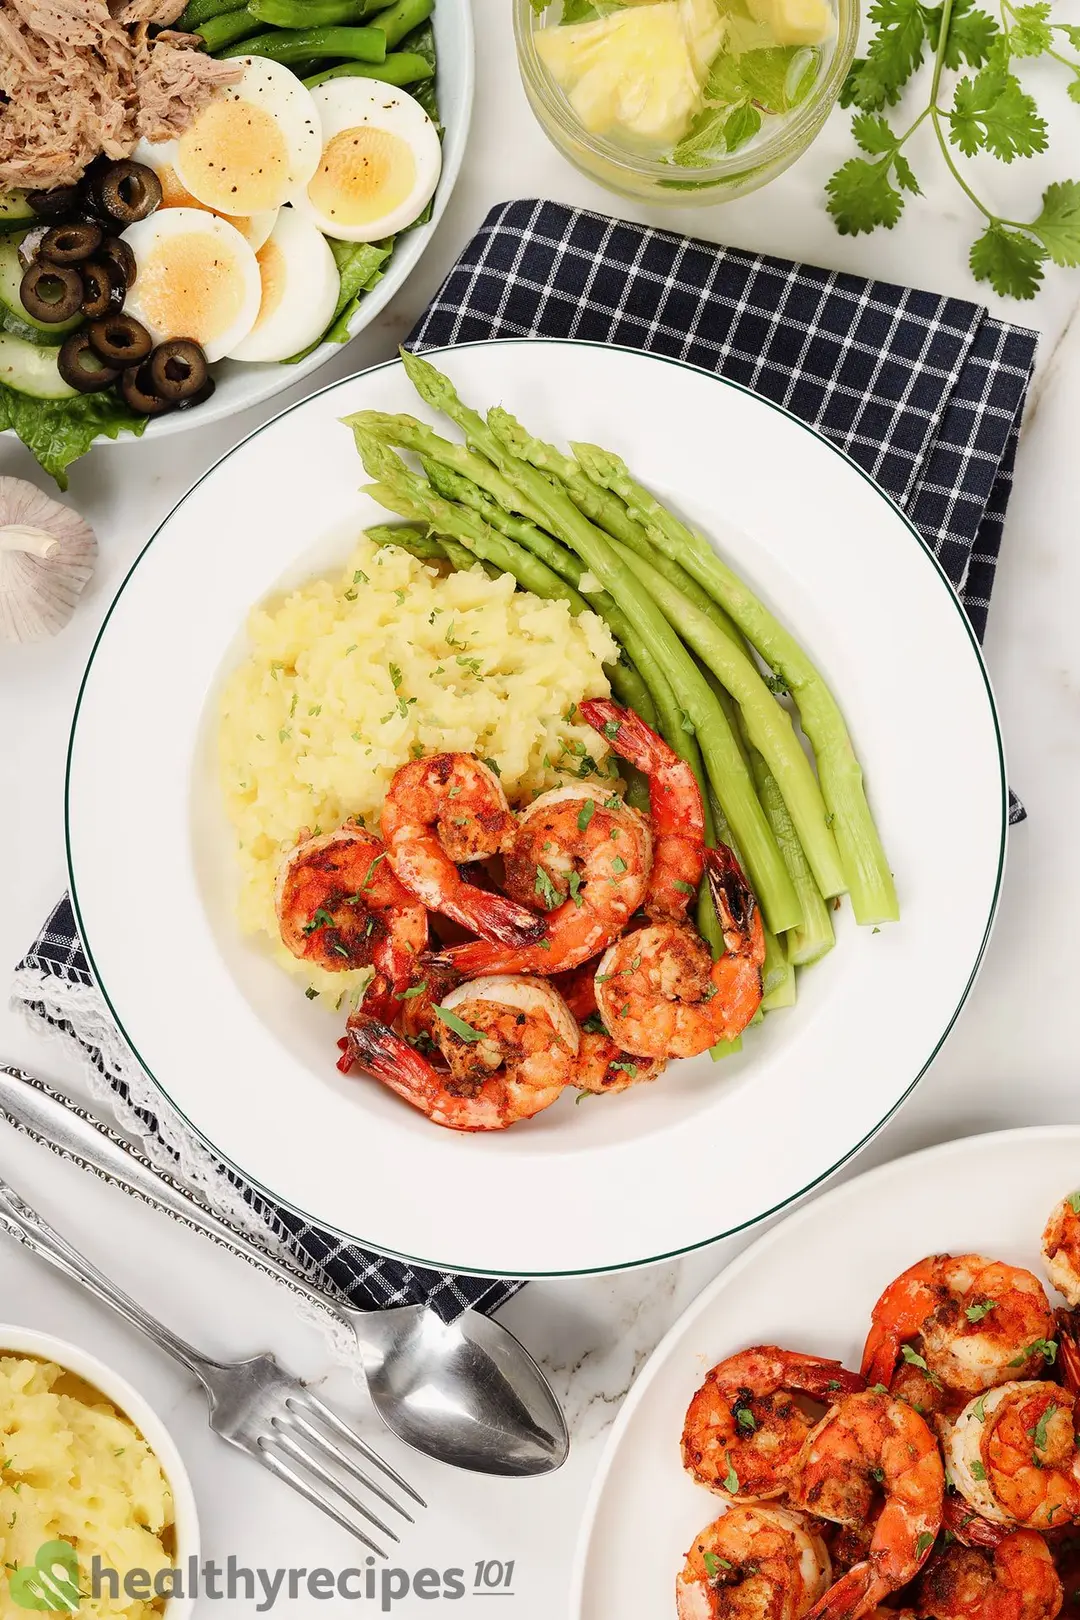 What to Serve With Blackened Shrimp